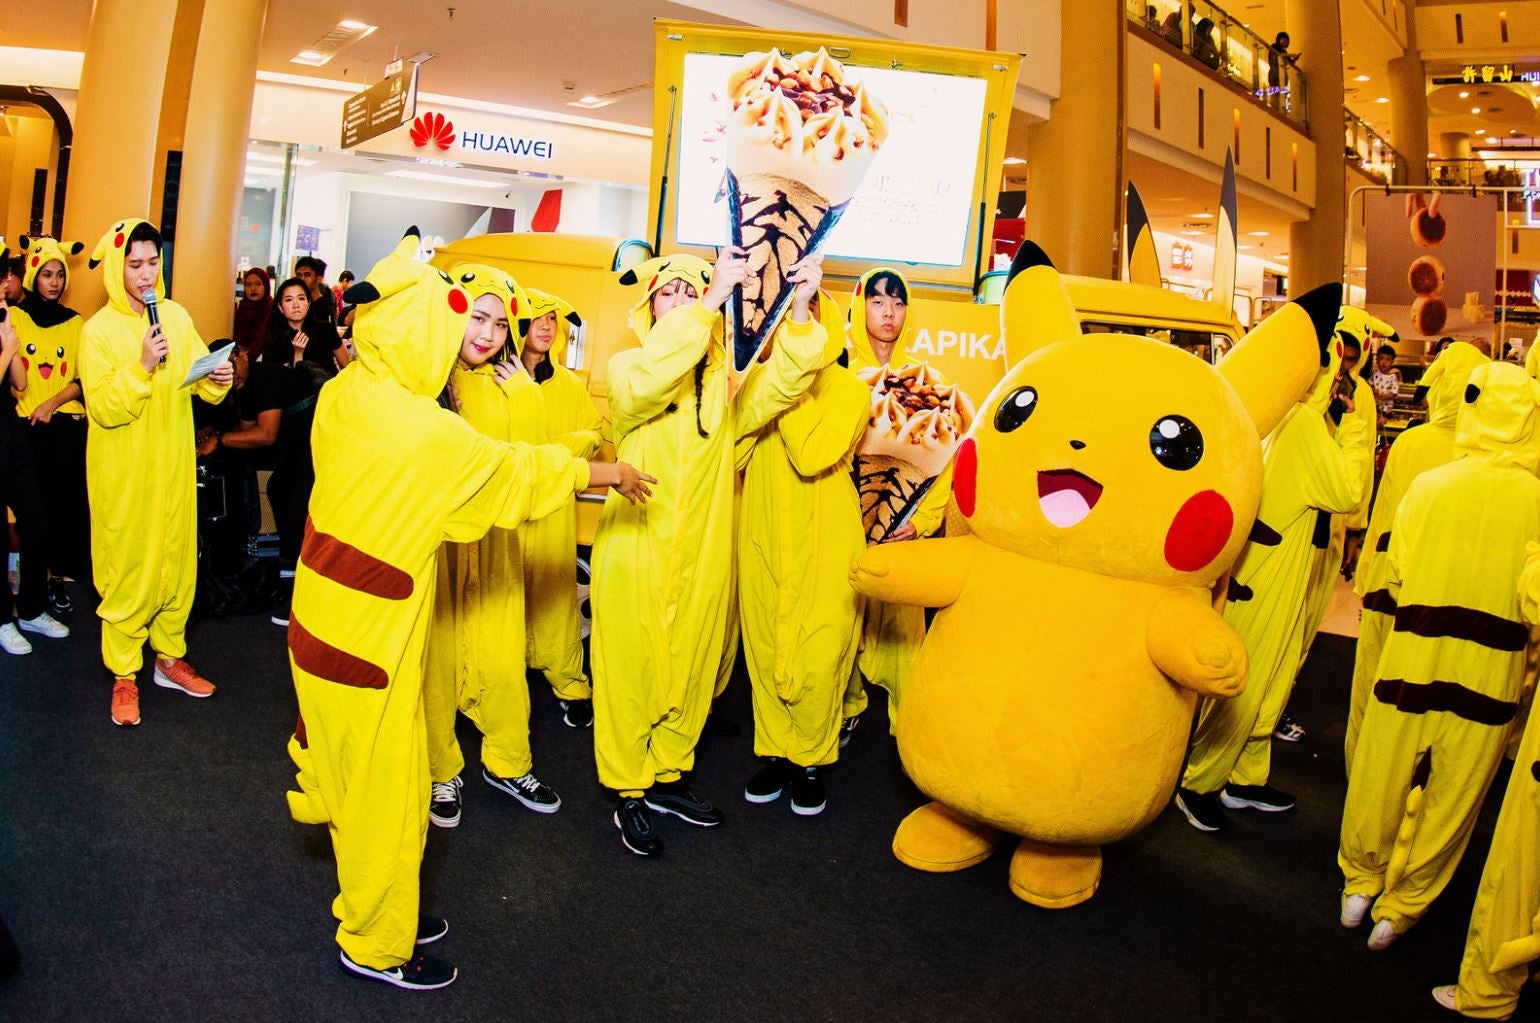 OMG Pikachu is Coming to Sunway Pyramid This 3rd & 4th August, Here's Why You Gotta Check It Out! - WORLD OF BUZZ 4